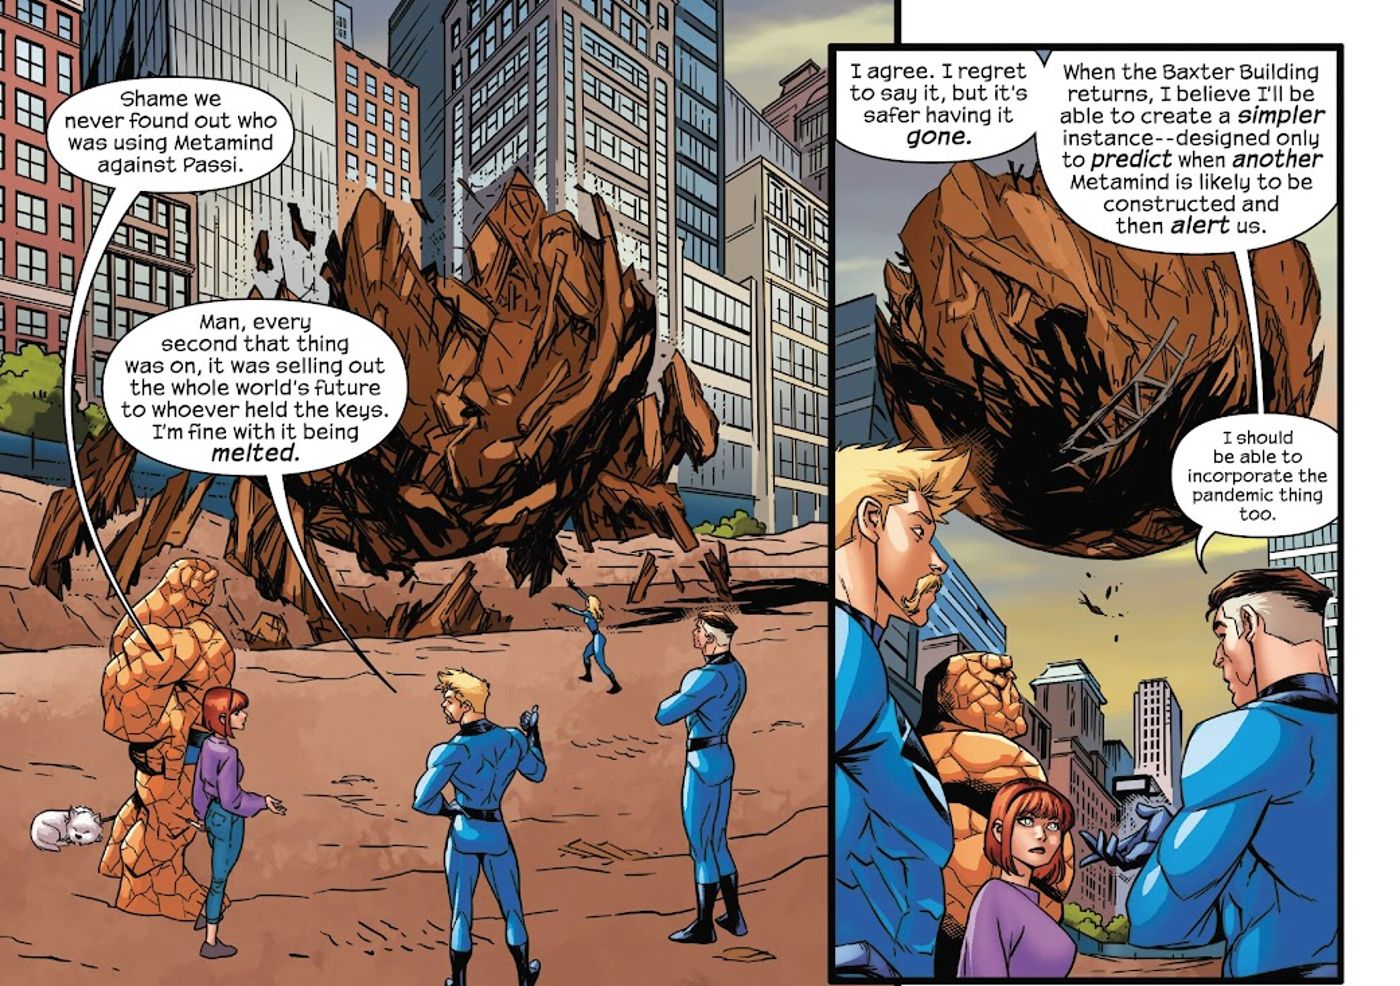 “Time Travel Without a Time Machine”: Reed Richards Just Became a Kang-Level Time Traveler (But He Won’t Be Corrupted)